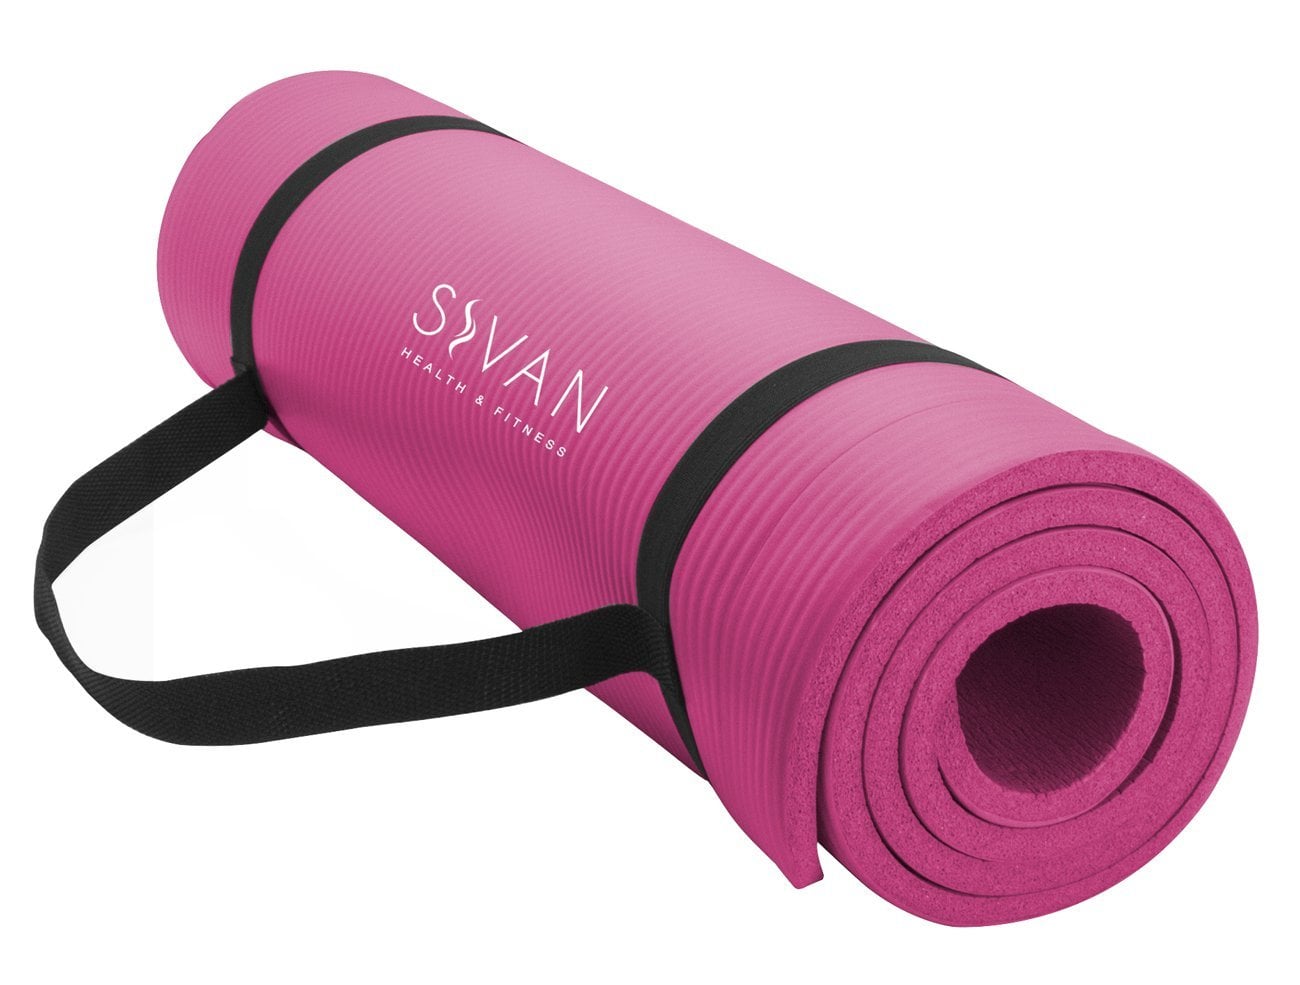 ideal yoga mat thickness